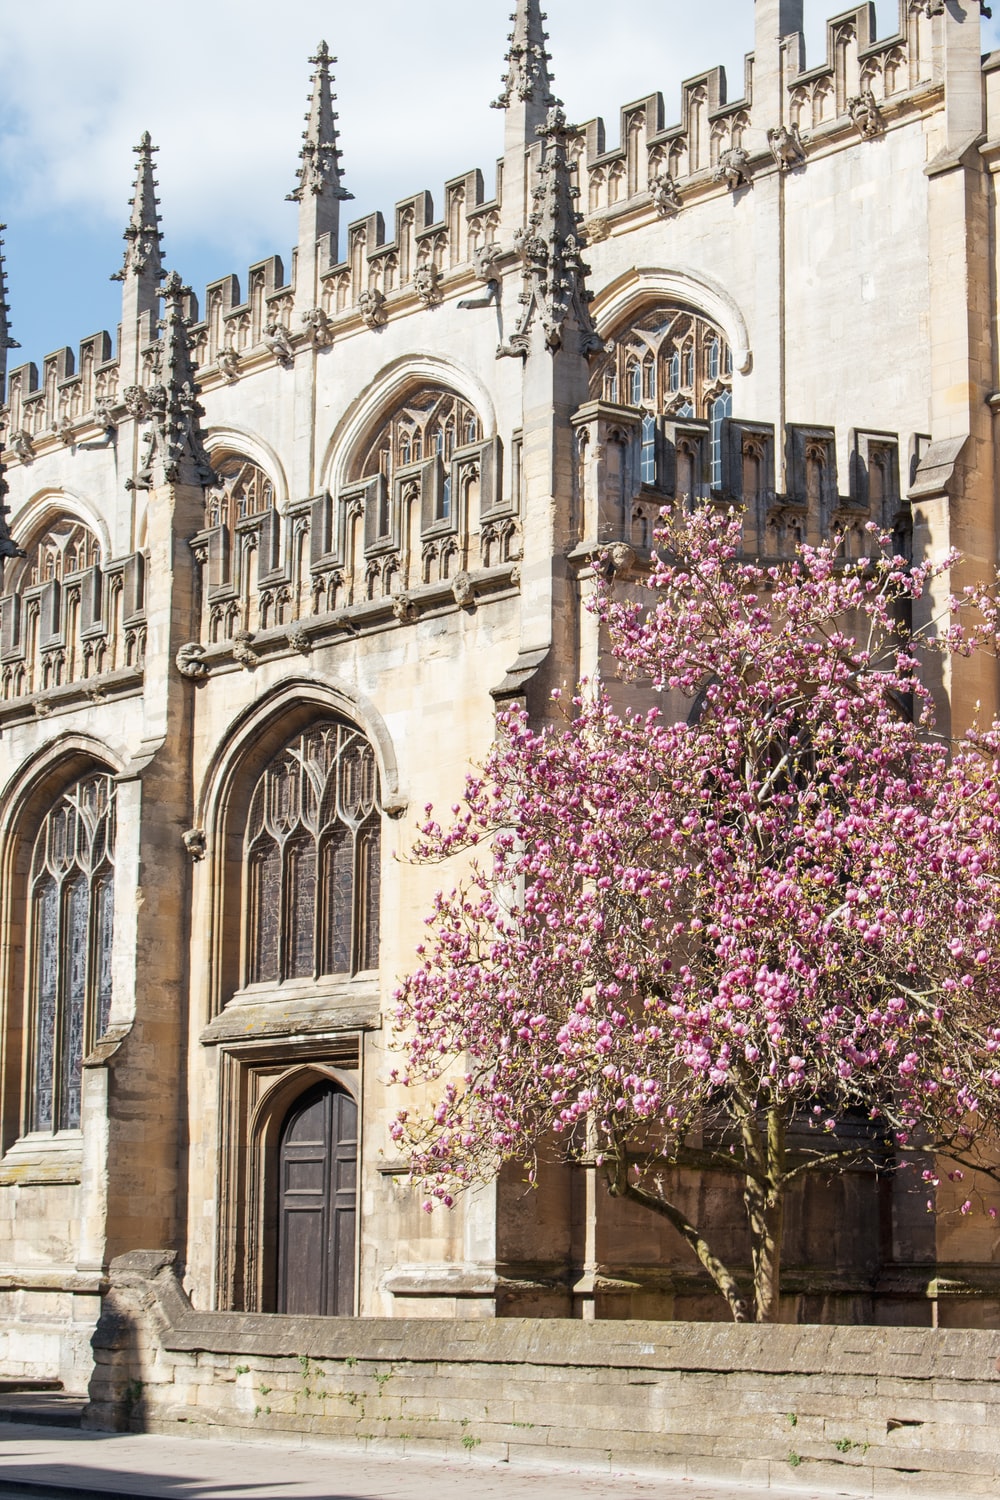 University Of Oxford Picture. Download Free Image